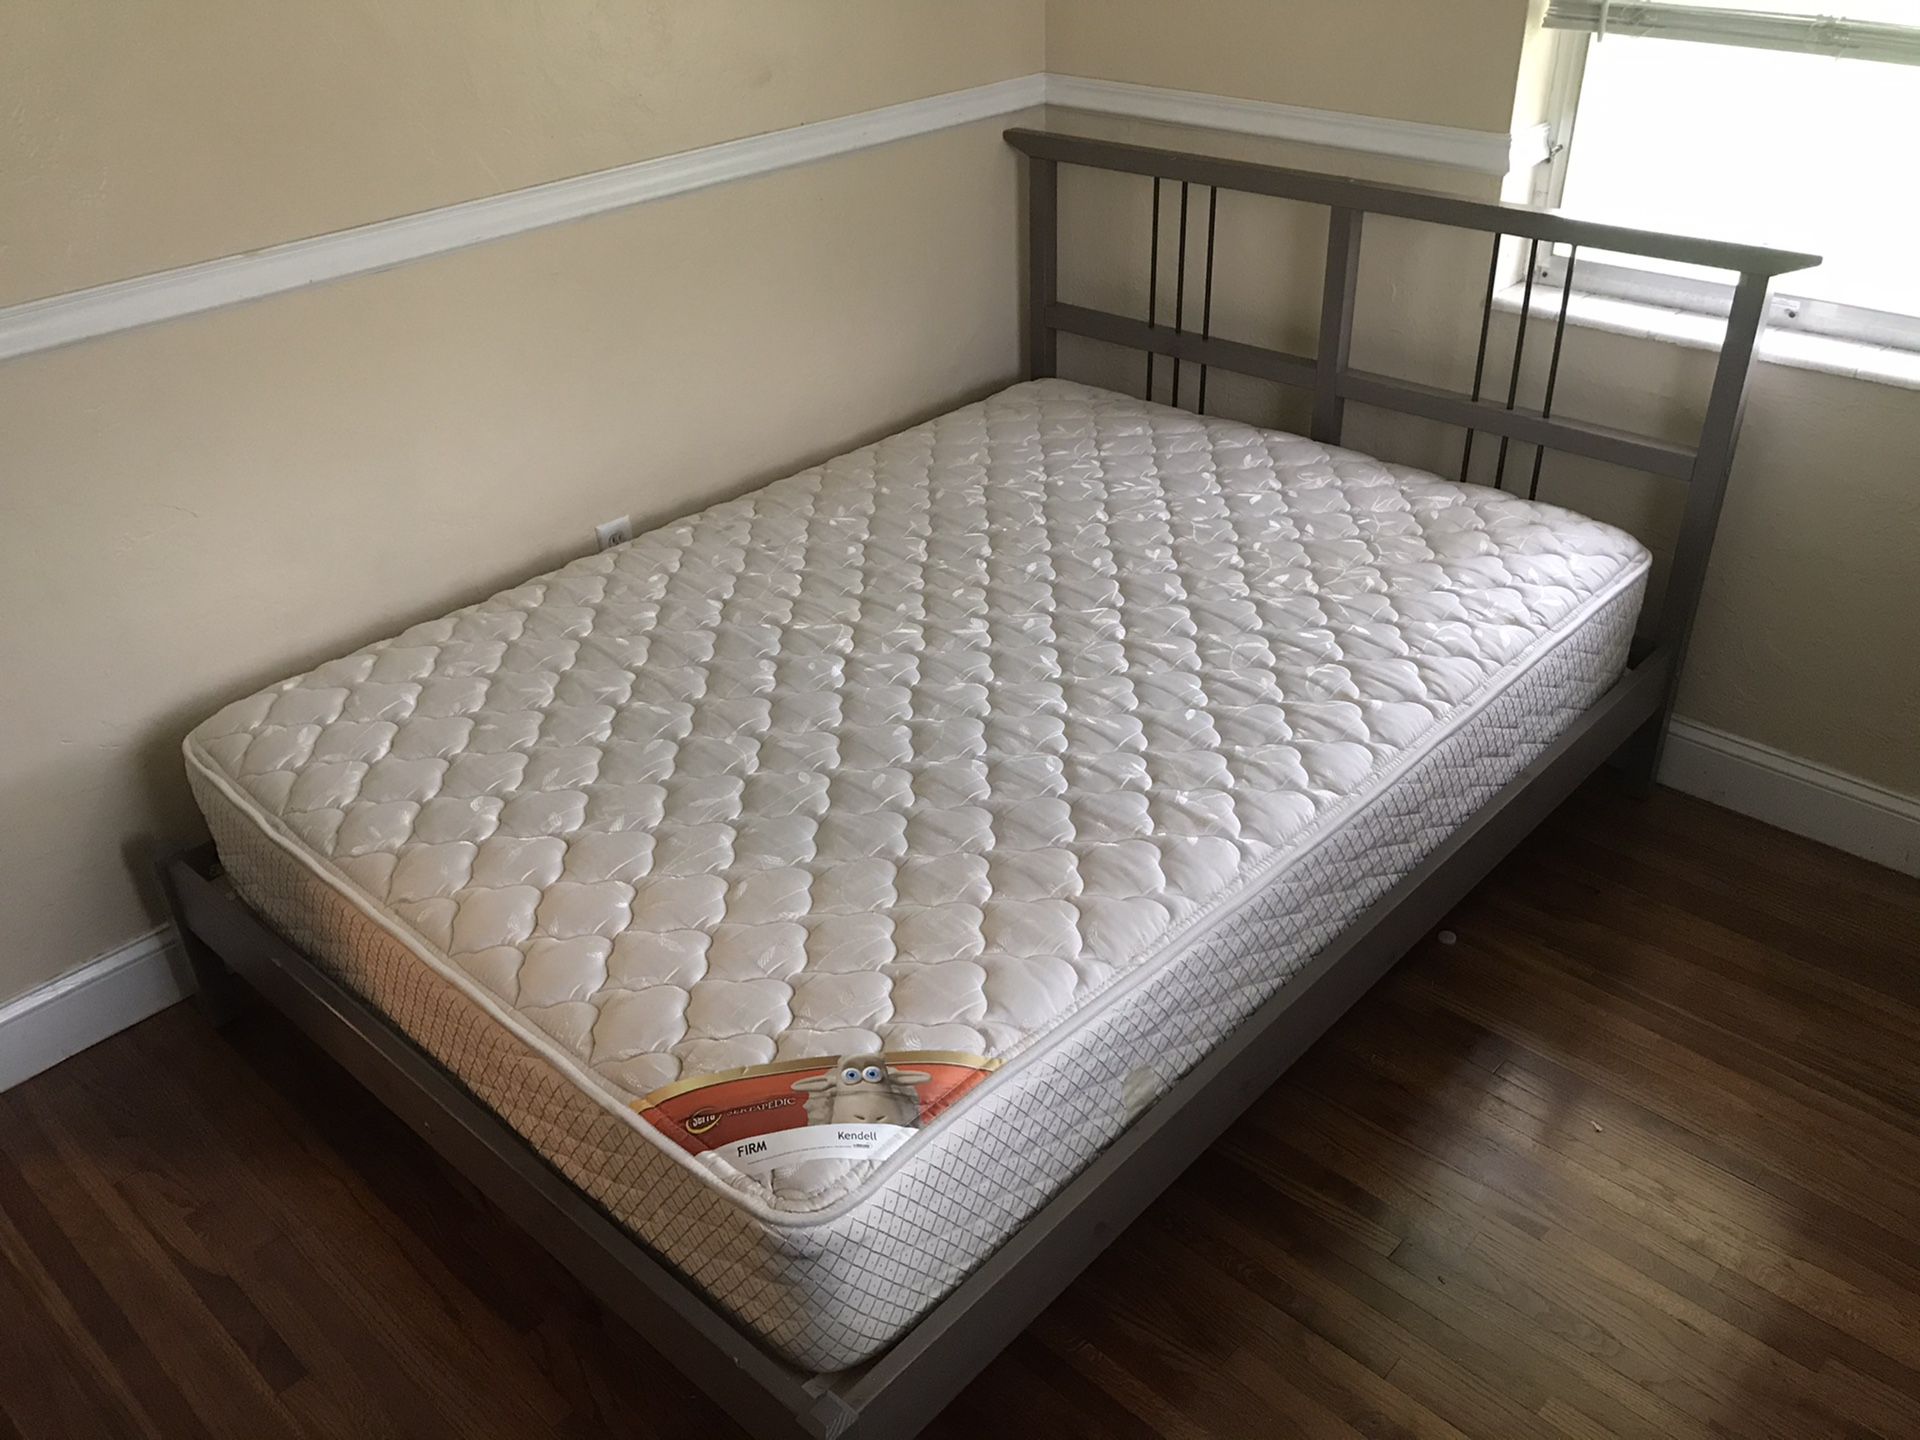 Full size IKEA Bed frame and mattress. Excellent condition used 1 month